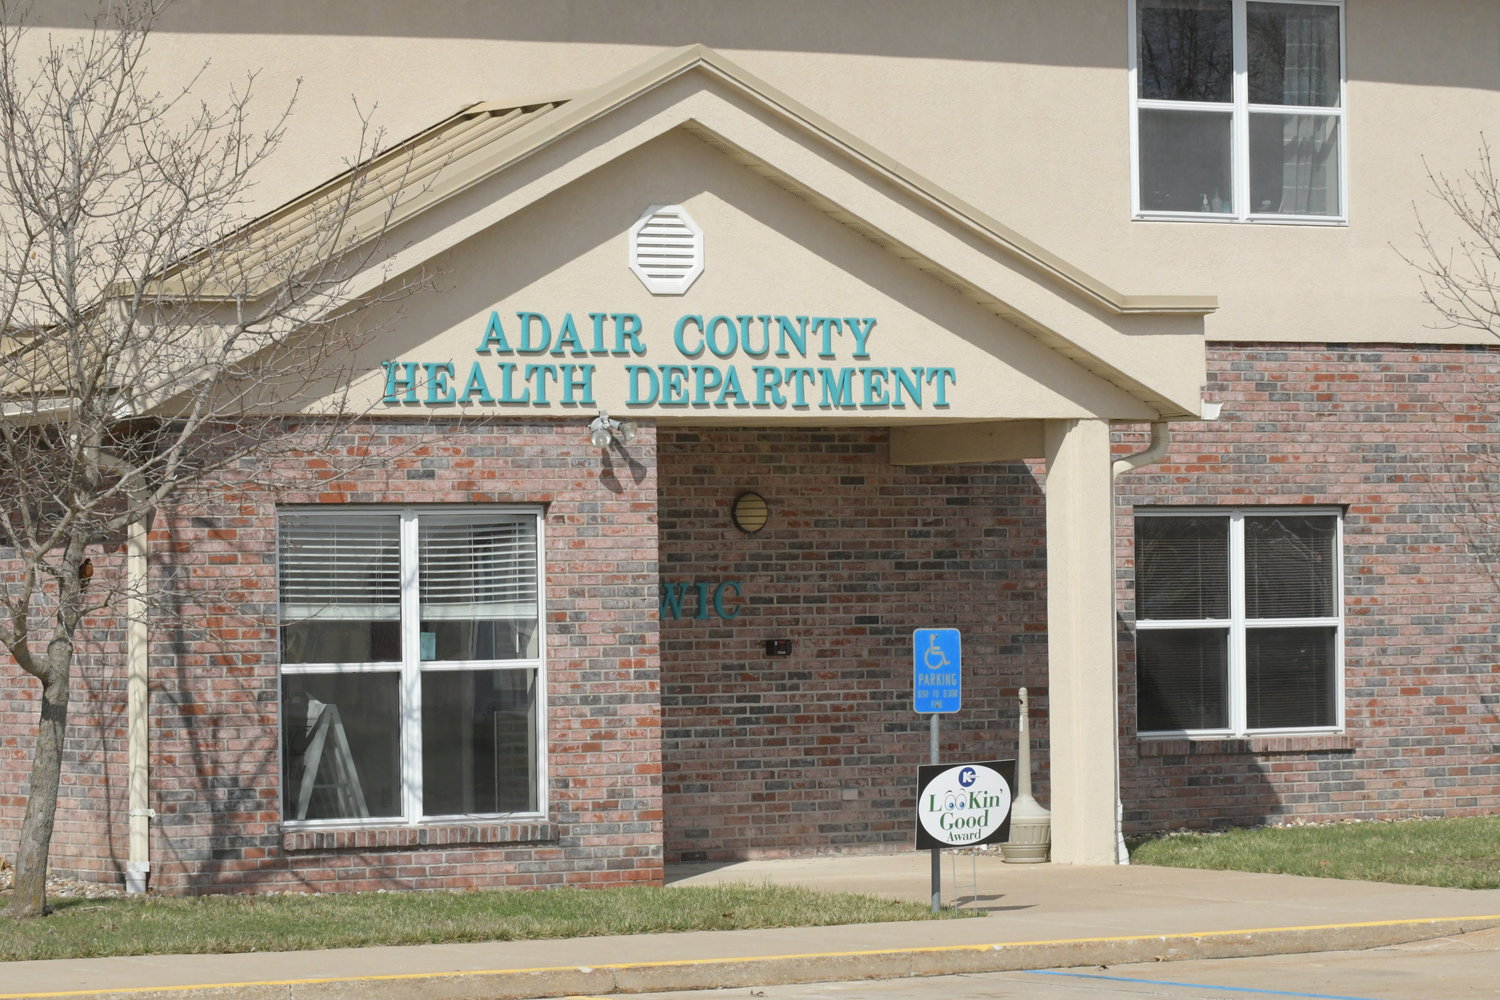 The Adair County Health Department.